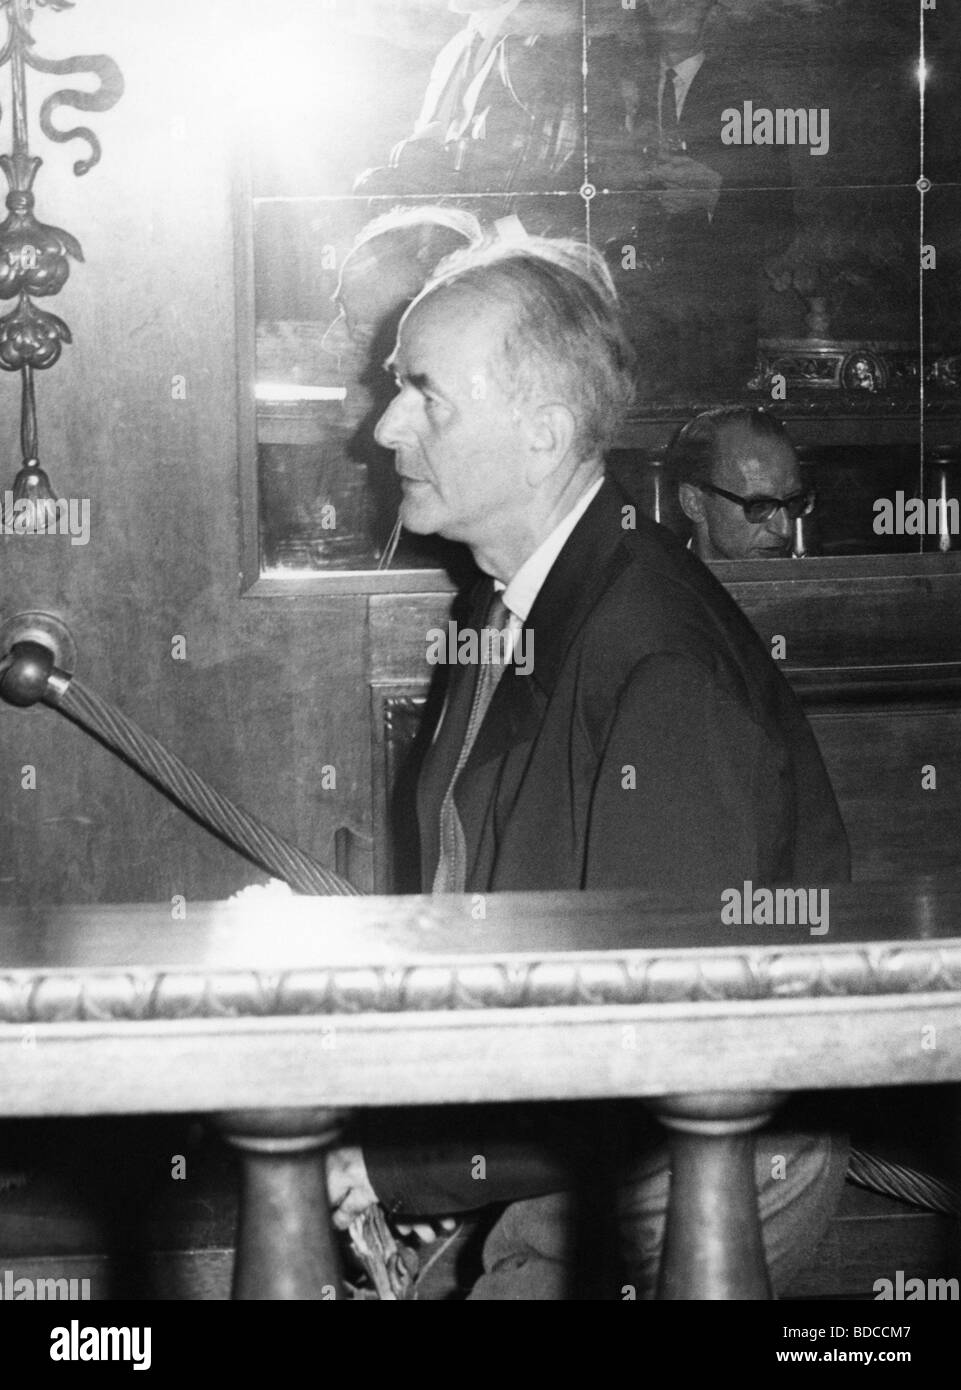 Speer, Albert, 19.3.1905 - 1.9.1981, German architect, politician (NSDAP), Minister of Armaments and War Production 1942 - 1945, half length, during press conference after his release from prison, 1.10.1966, Stock Photo